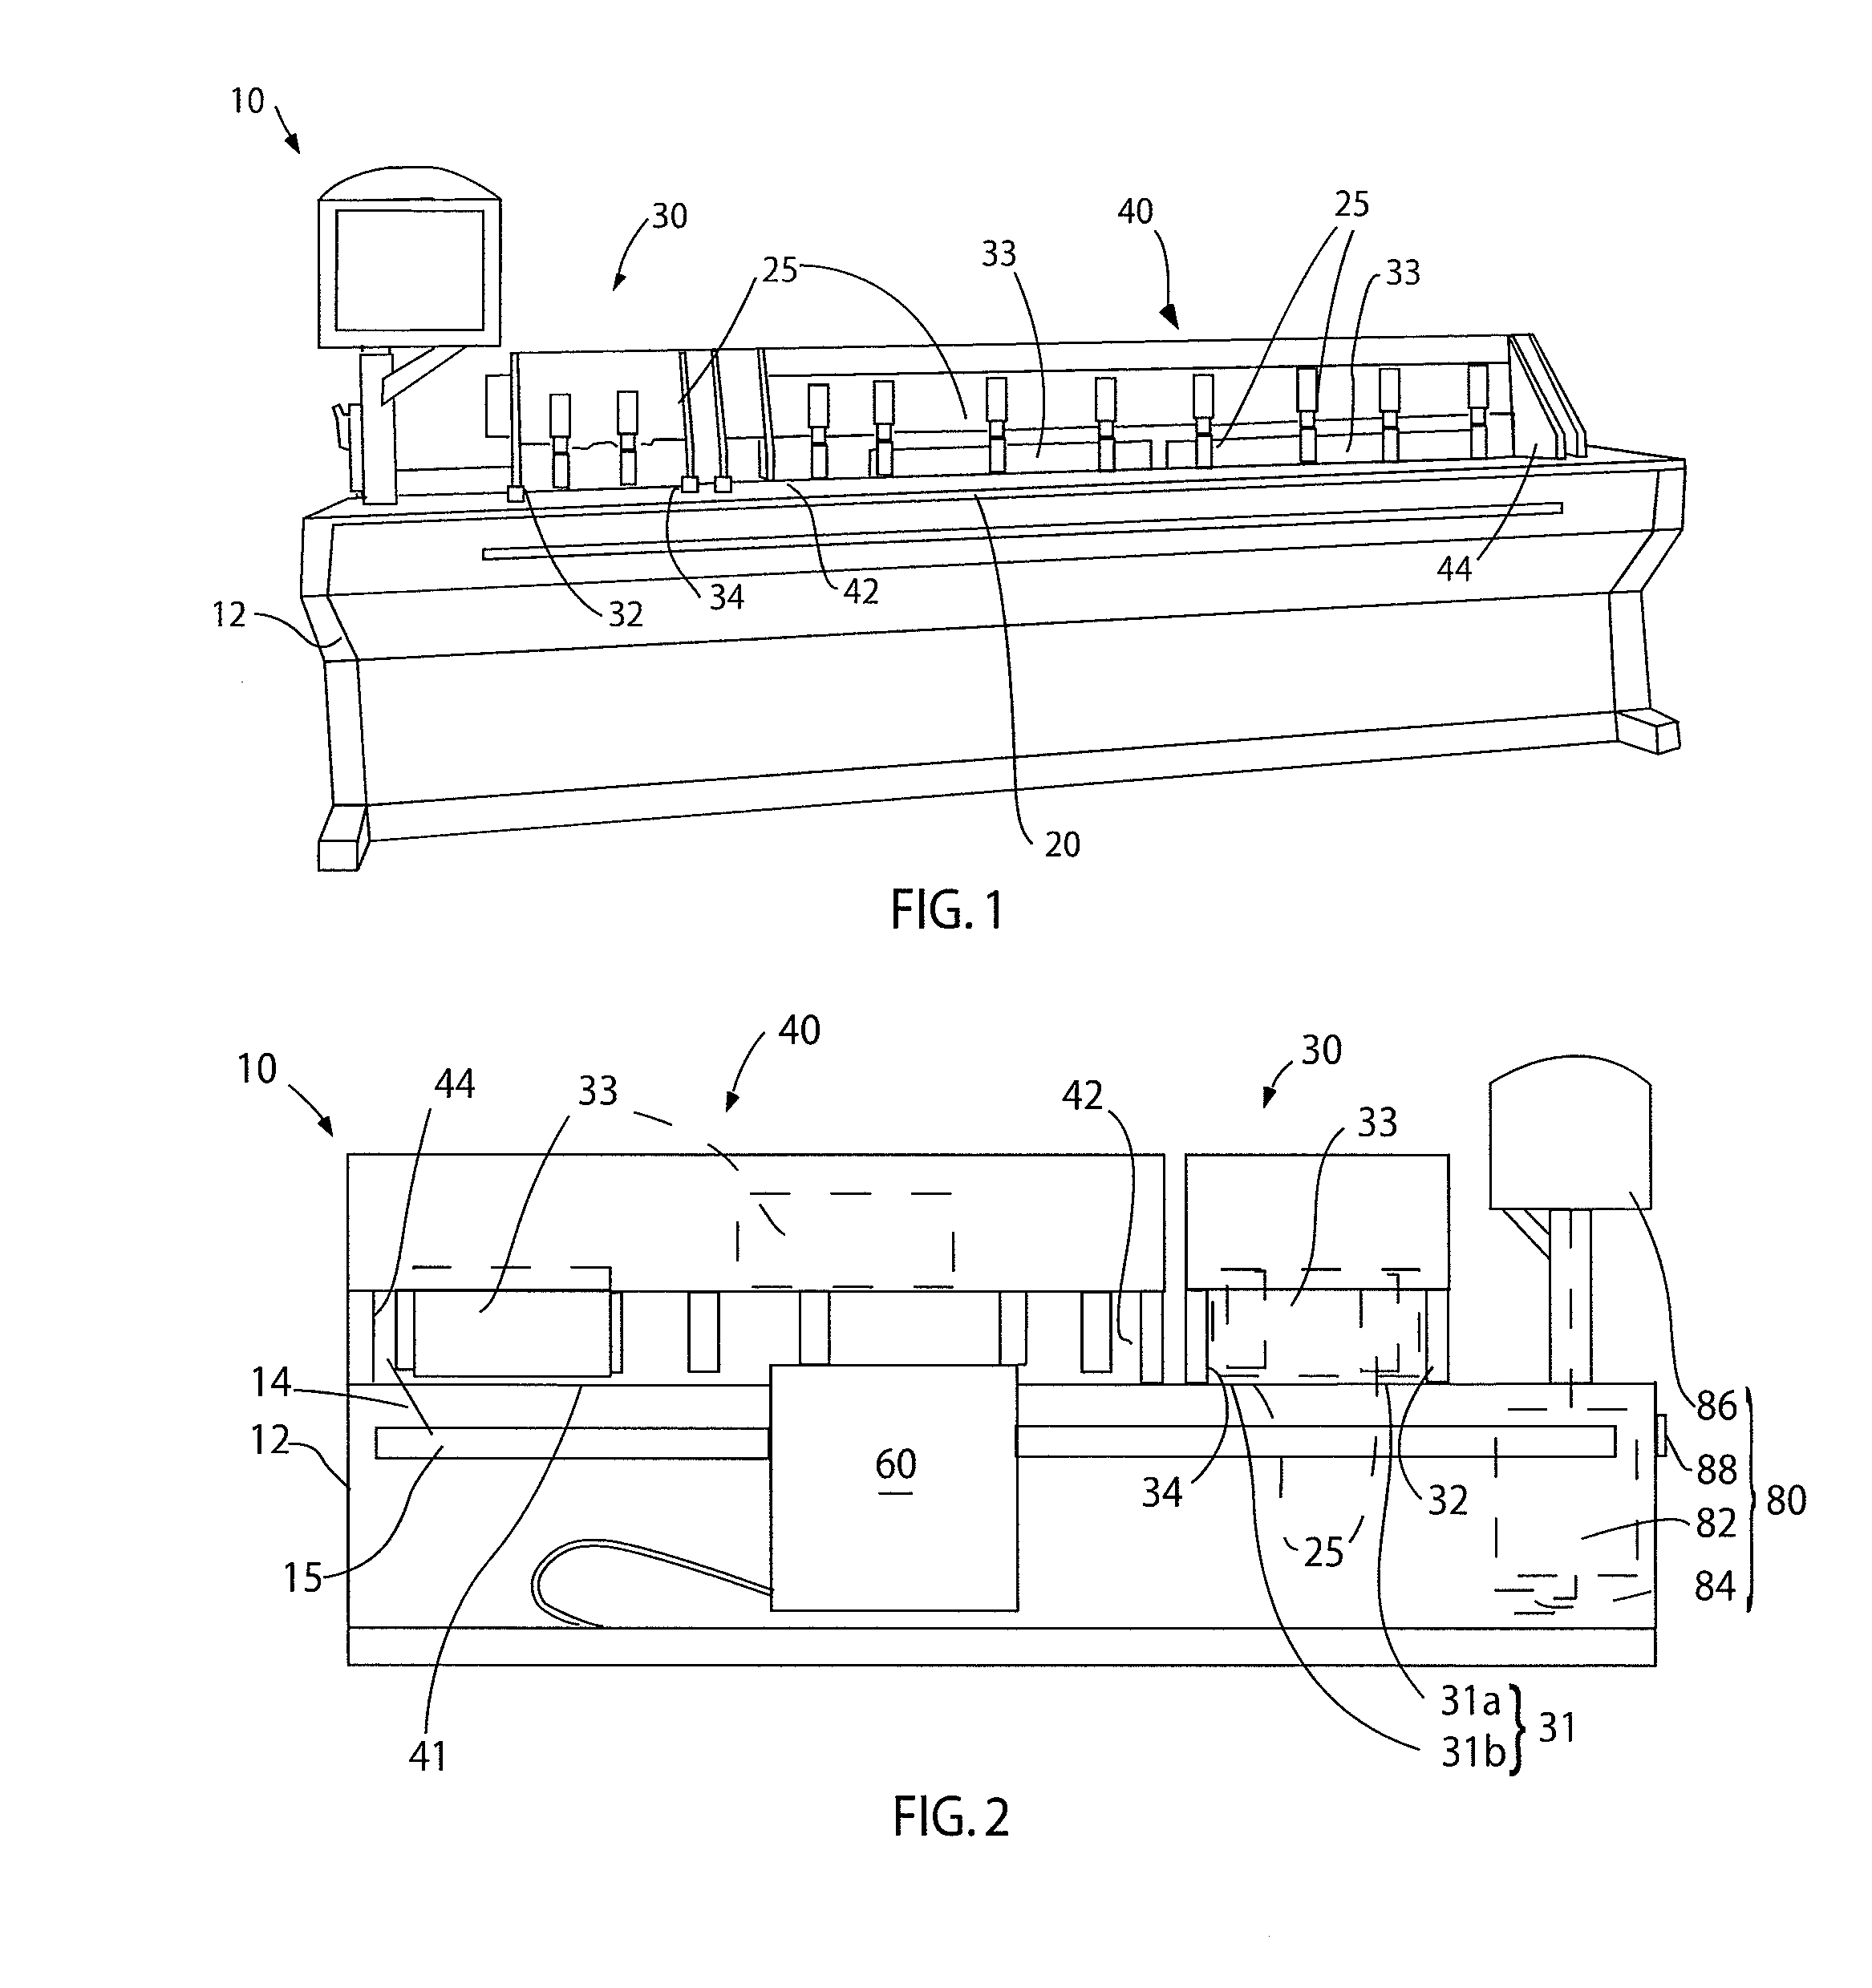 Apparatus and methods for shaping and machining elongate workpieces